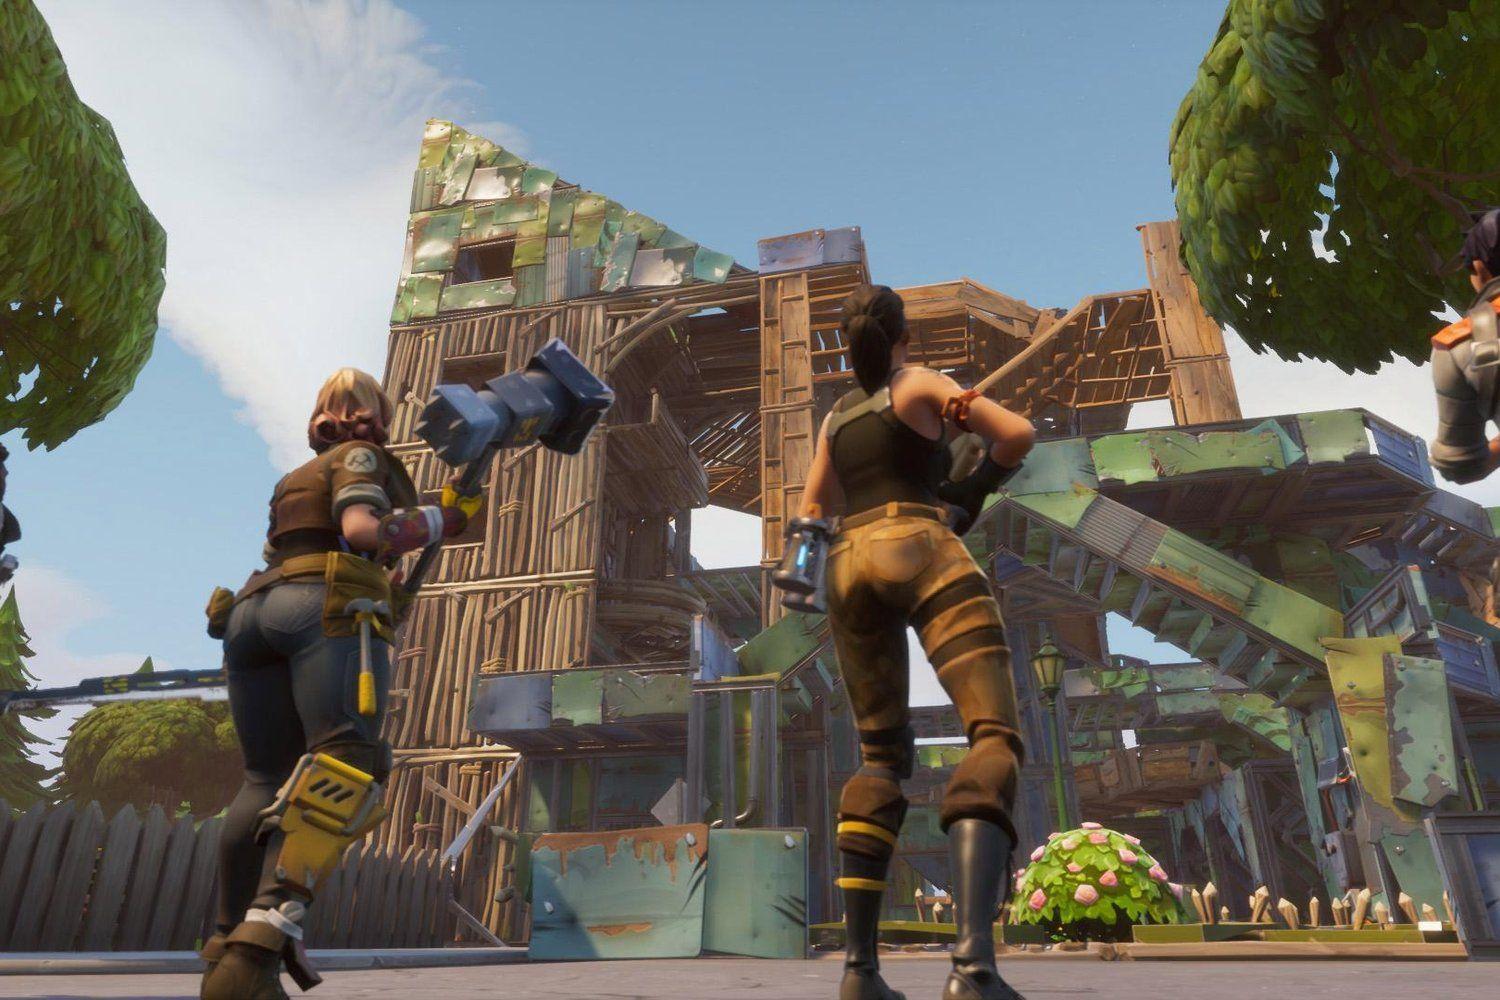 Fortnite players: The 10 types of players we all know